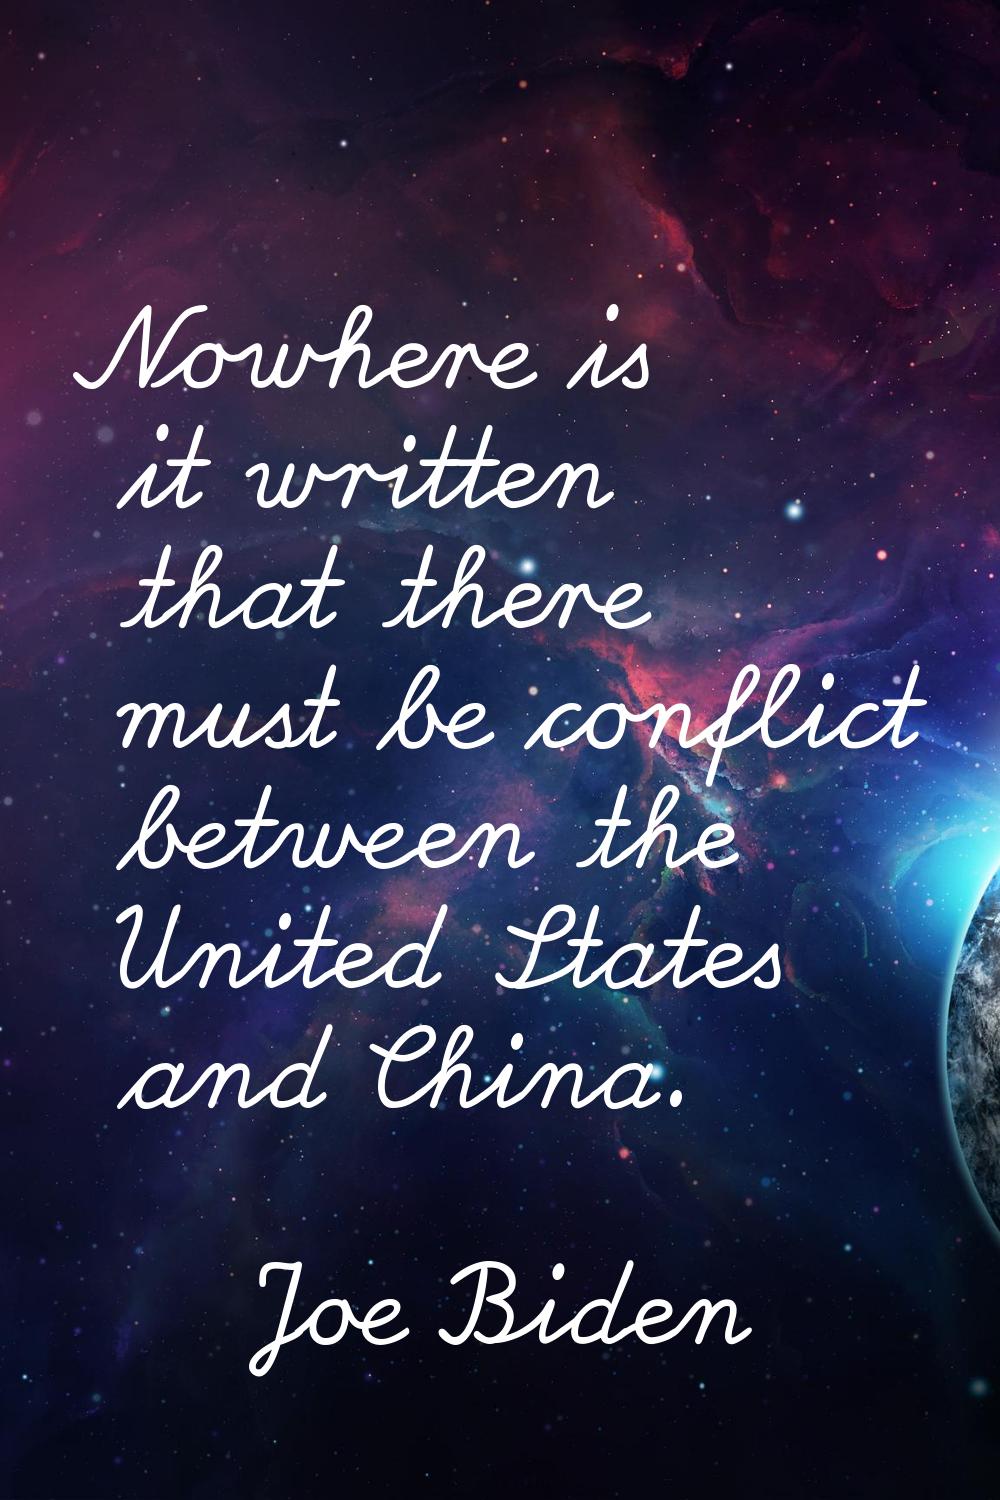 Nowhere is it written that there must be conflict between the United States and China.